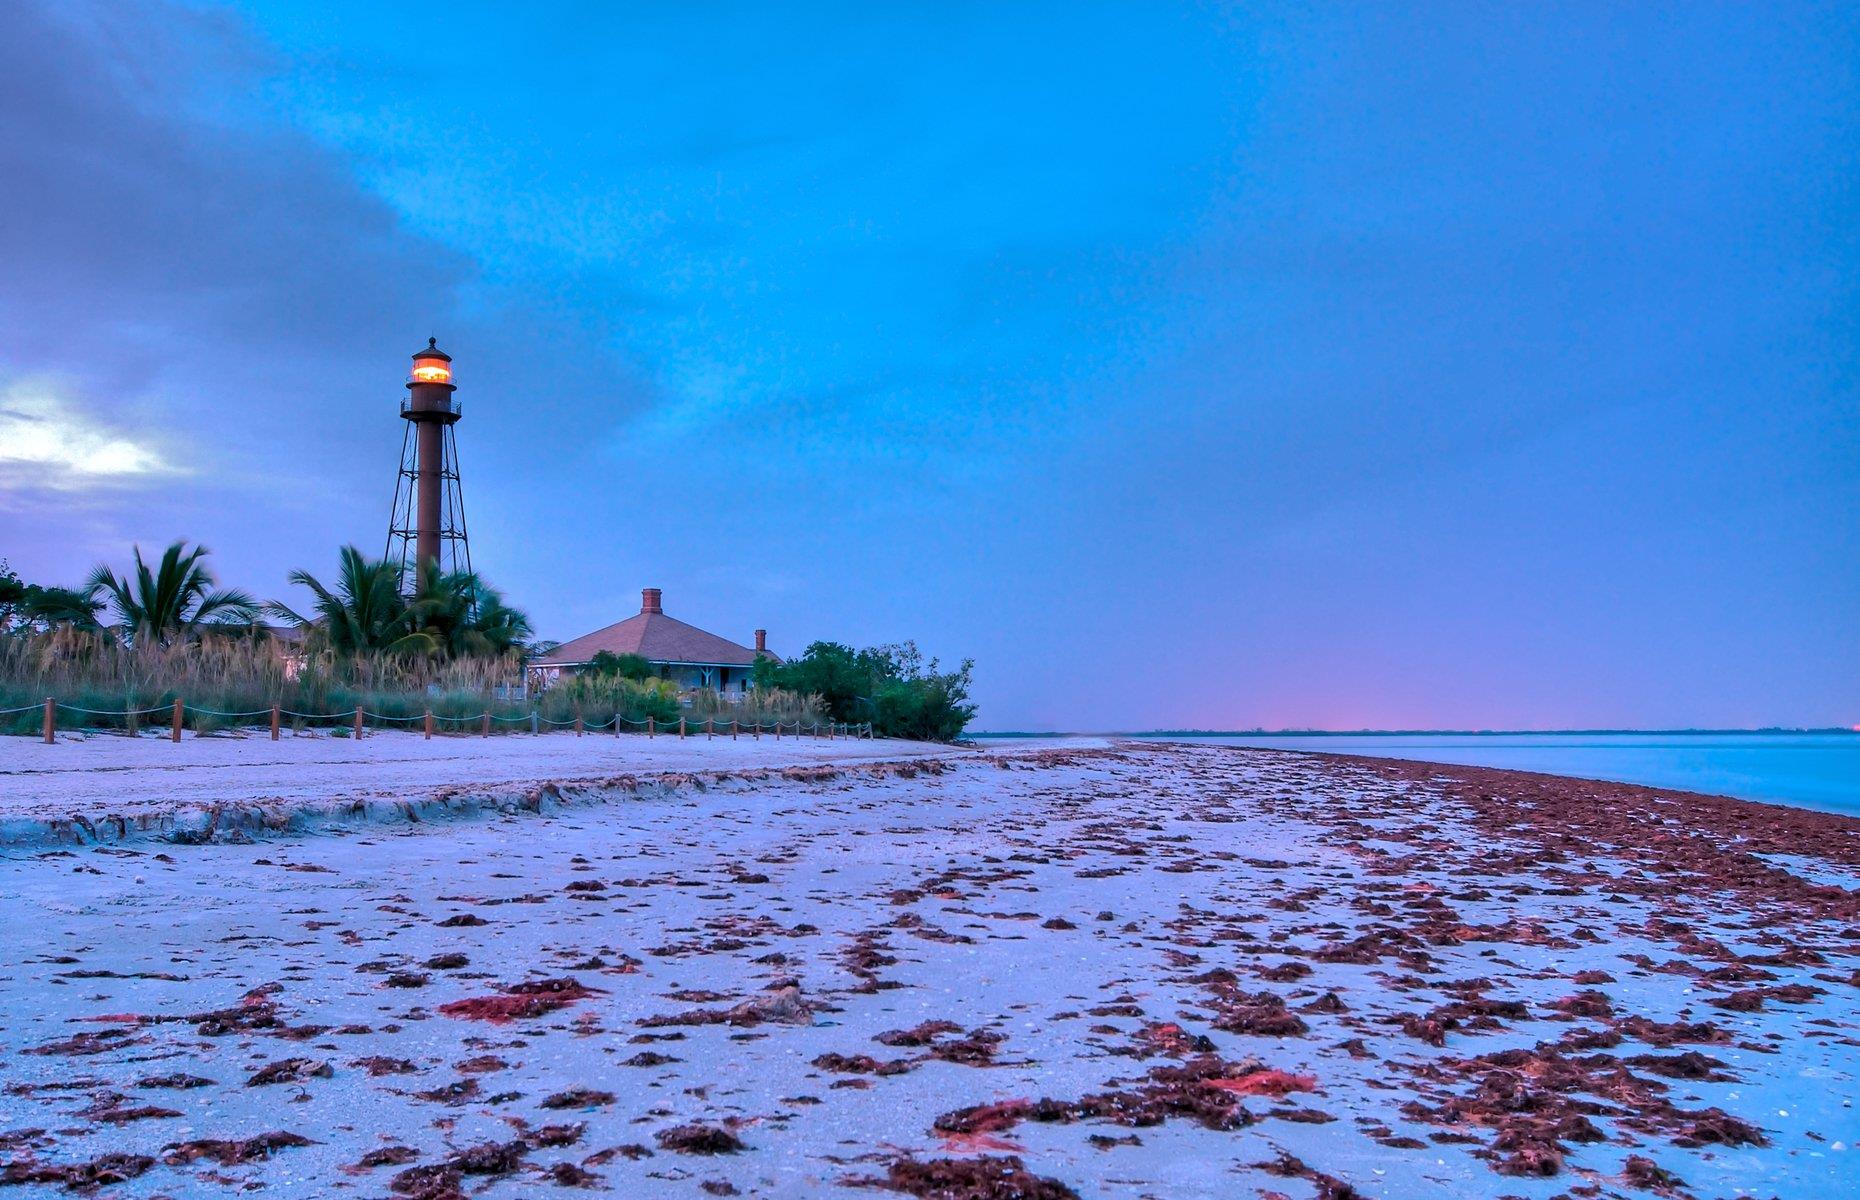 <p>Sanibel Island is completely show-stopping at sunset, when its seaweed-dappled shores are painted an array of pastel hues. Located west of Fort Myers, the 15-mile (24km) long, five-mile (8km) wide island is crowned by the 19th-century Sanibel Lighthouse, which remains in operation today. But that’s not the only treasure to be found in this small city. Known for being home to a wide range of seashells, Sanibel Island’s beaches are so popular with shell-hunters that hotels provide special facilities for sorting and cleaning them, while there's even a <a href="https://www.shellmuseum.org/">dedicated museum</a> here containing the world's largest shells. </p>